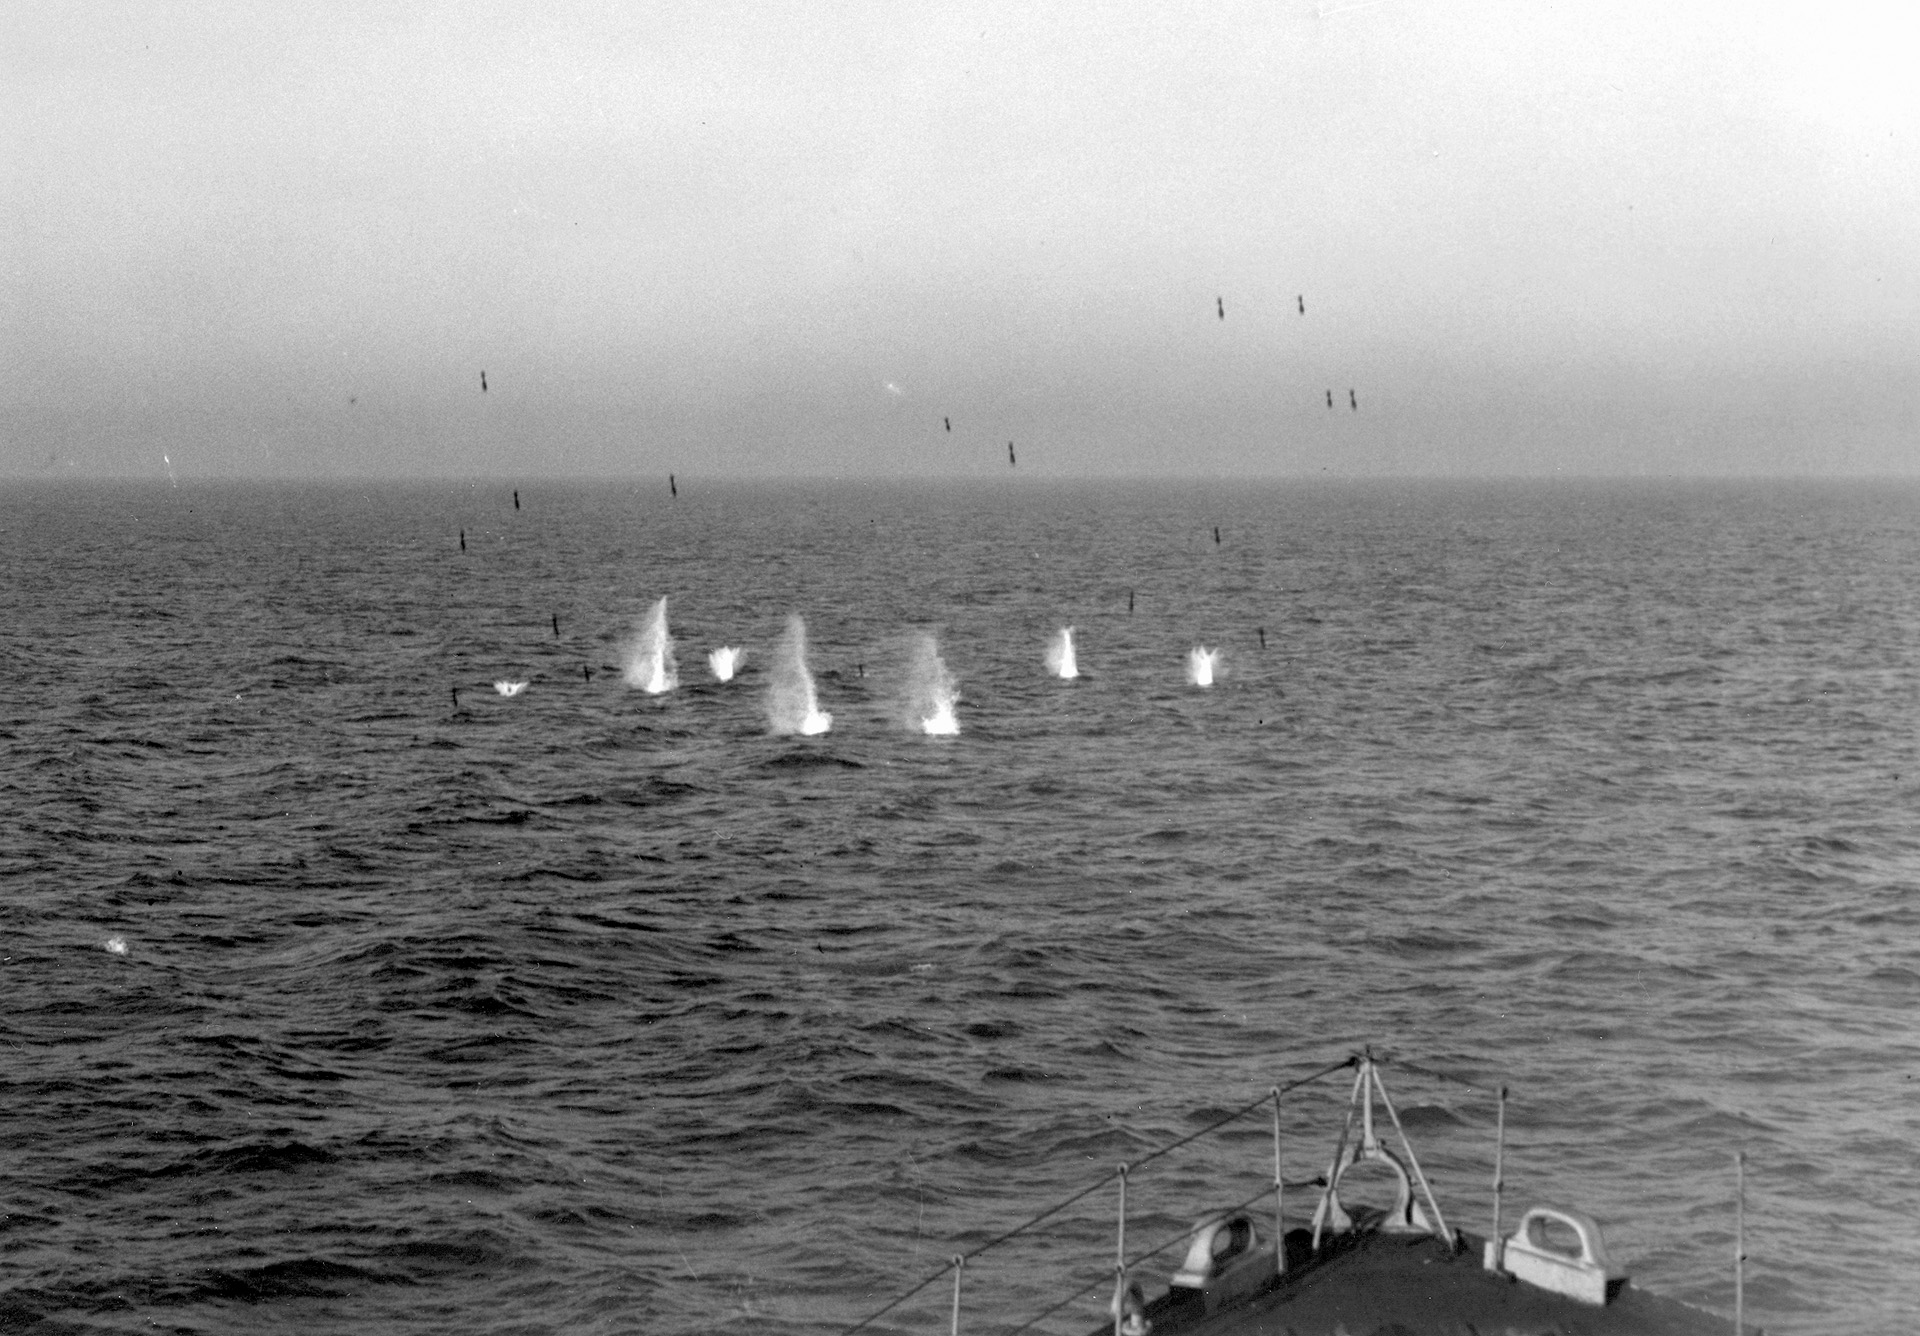  A full pattern of 24 Hedgehog bomblets, some still airborne, seeks an enemy submarine in the Atlantic.